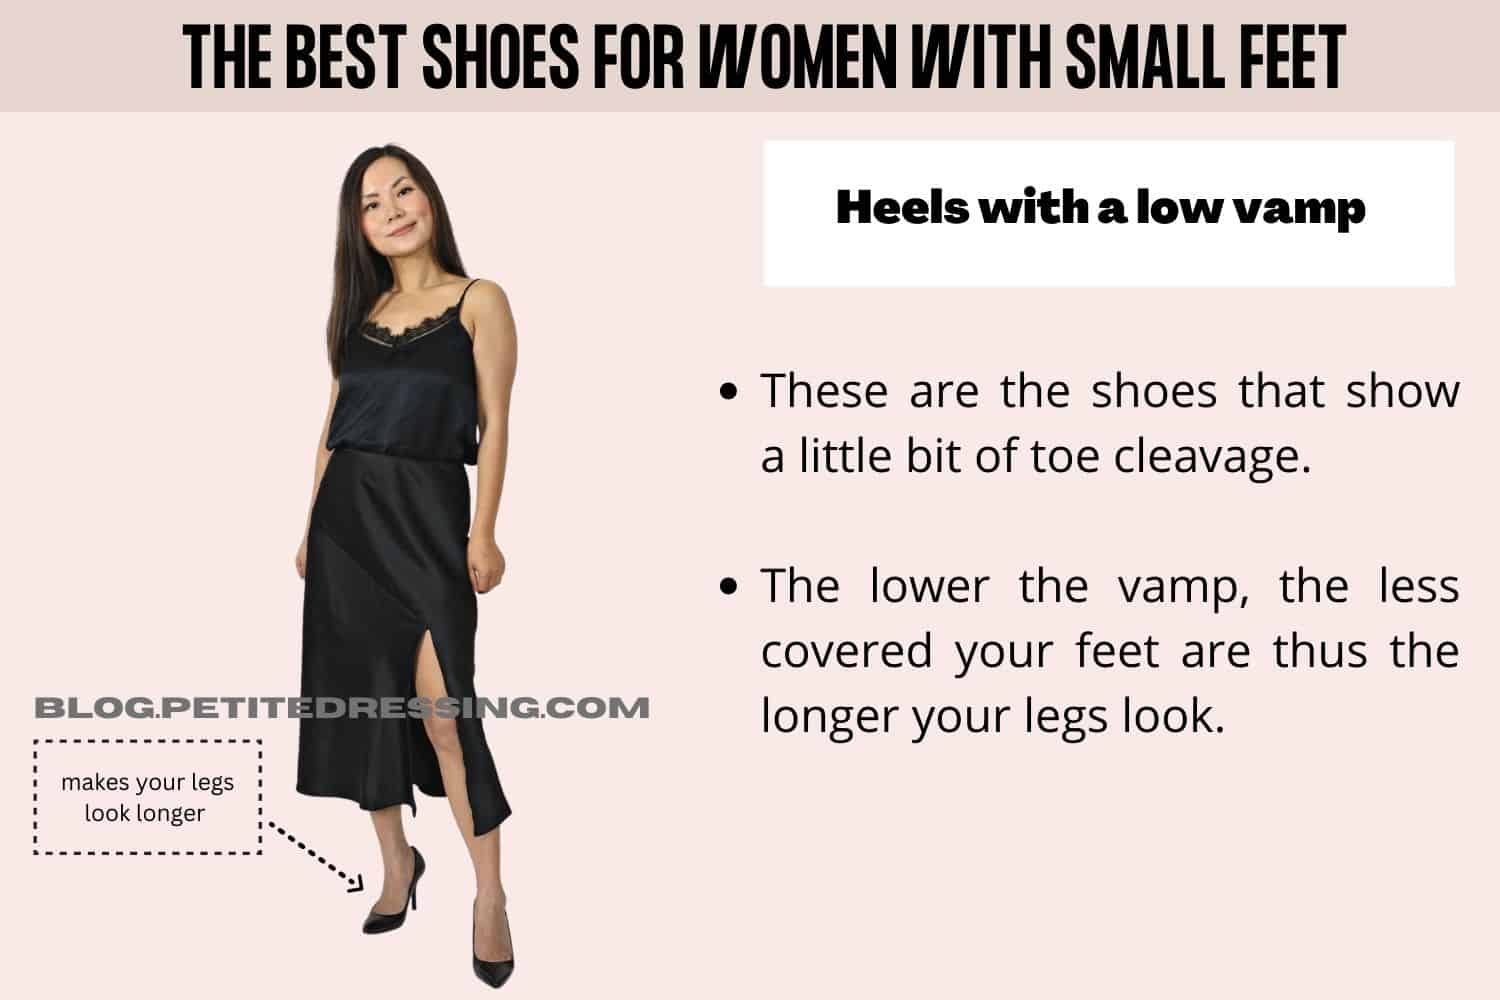 Got Small Feet? Here is the 12 Best and Worst Shoes for You